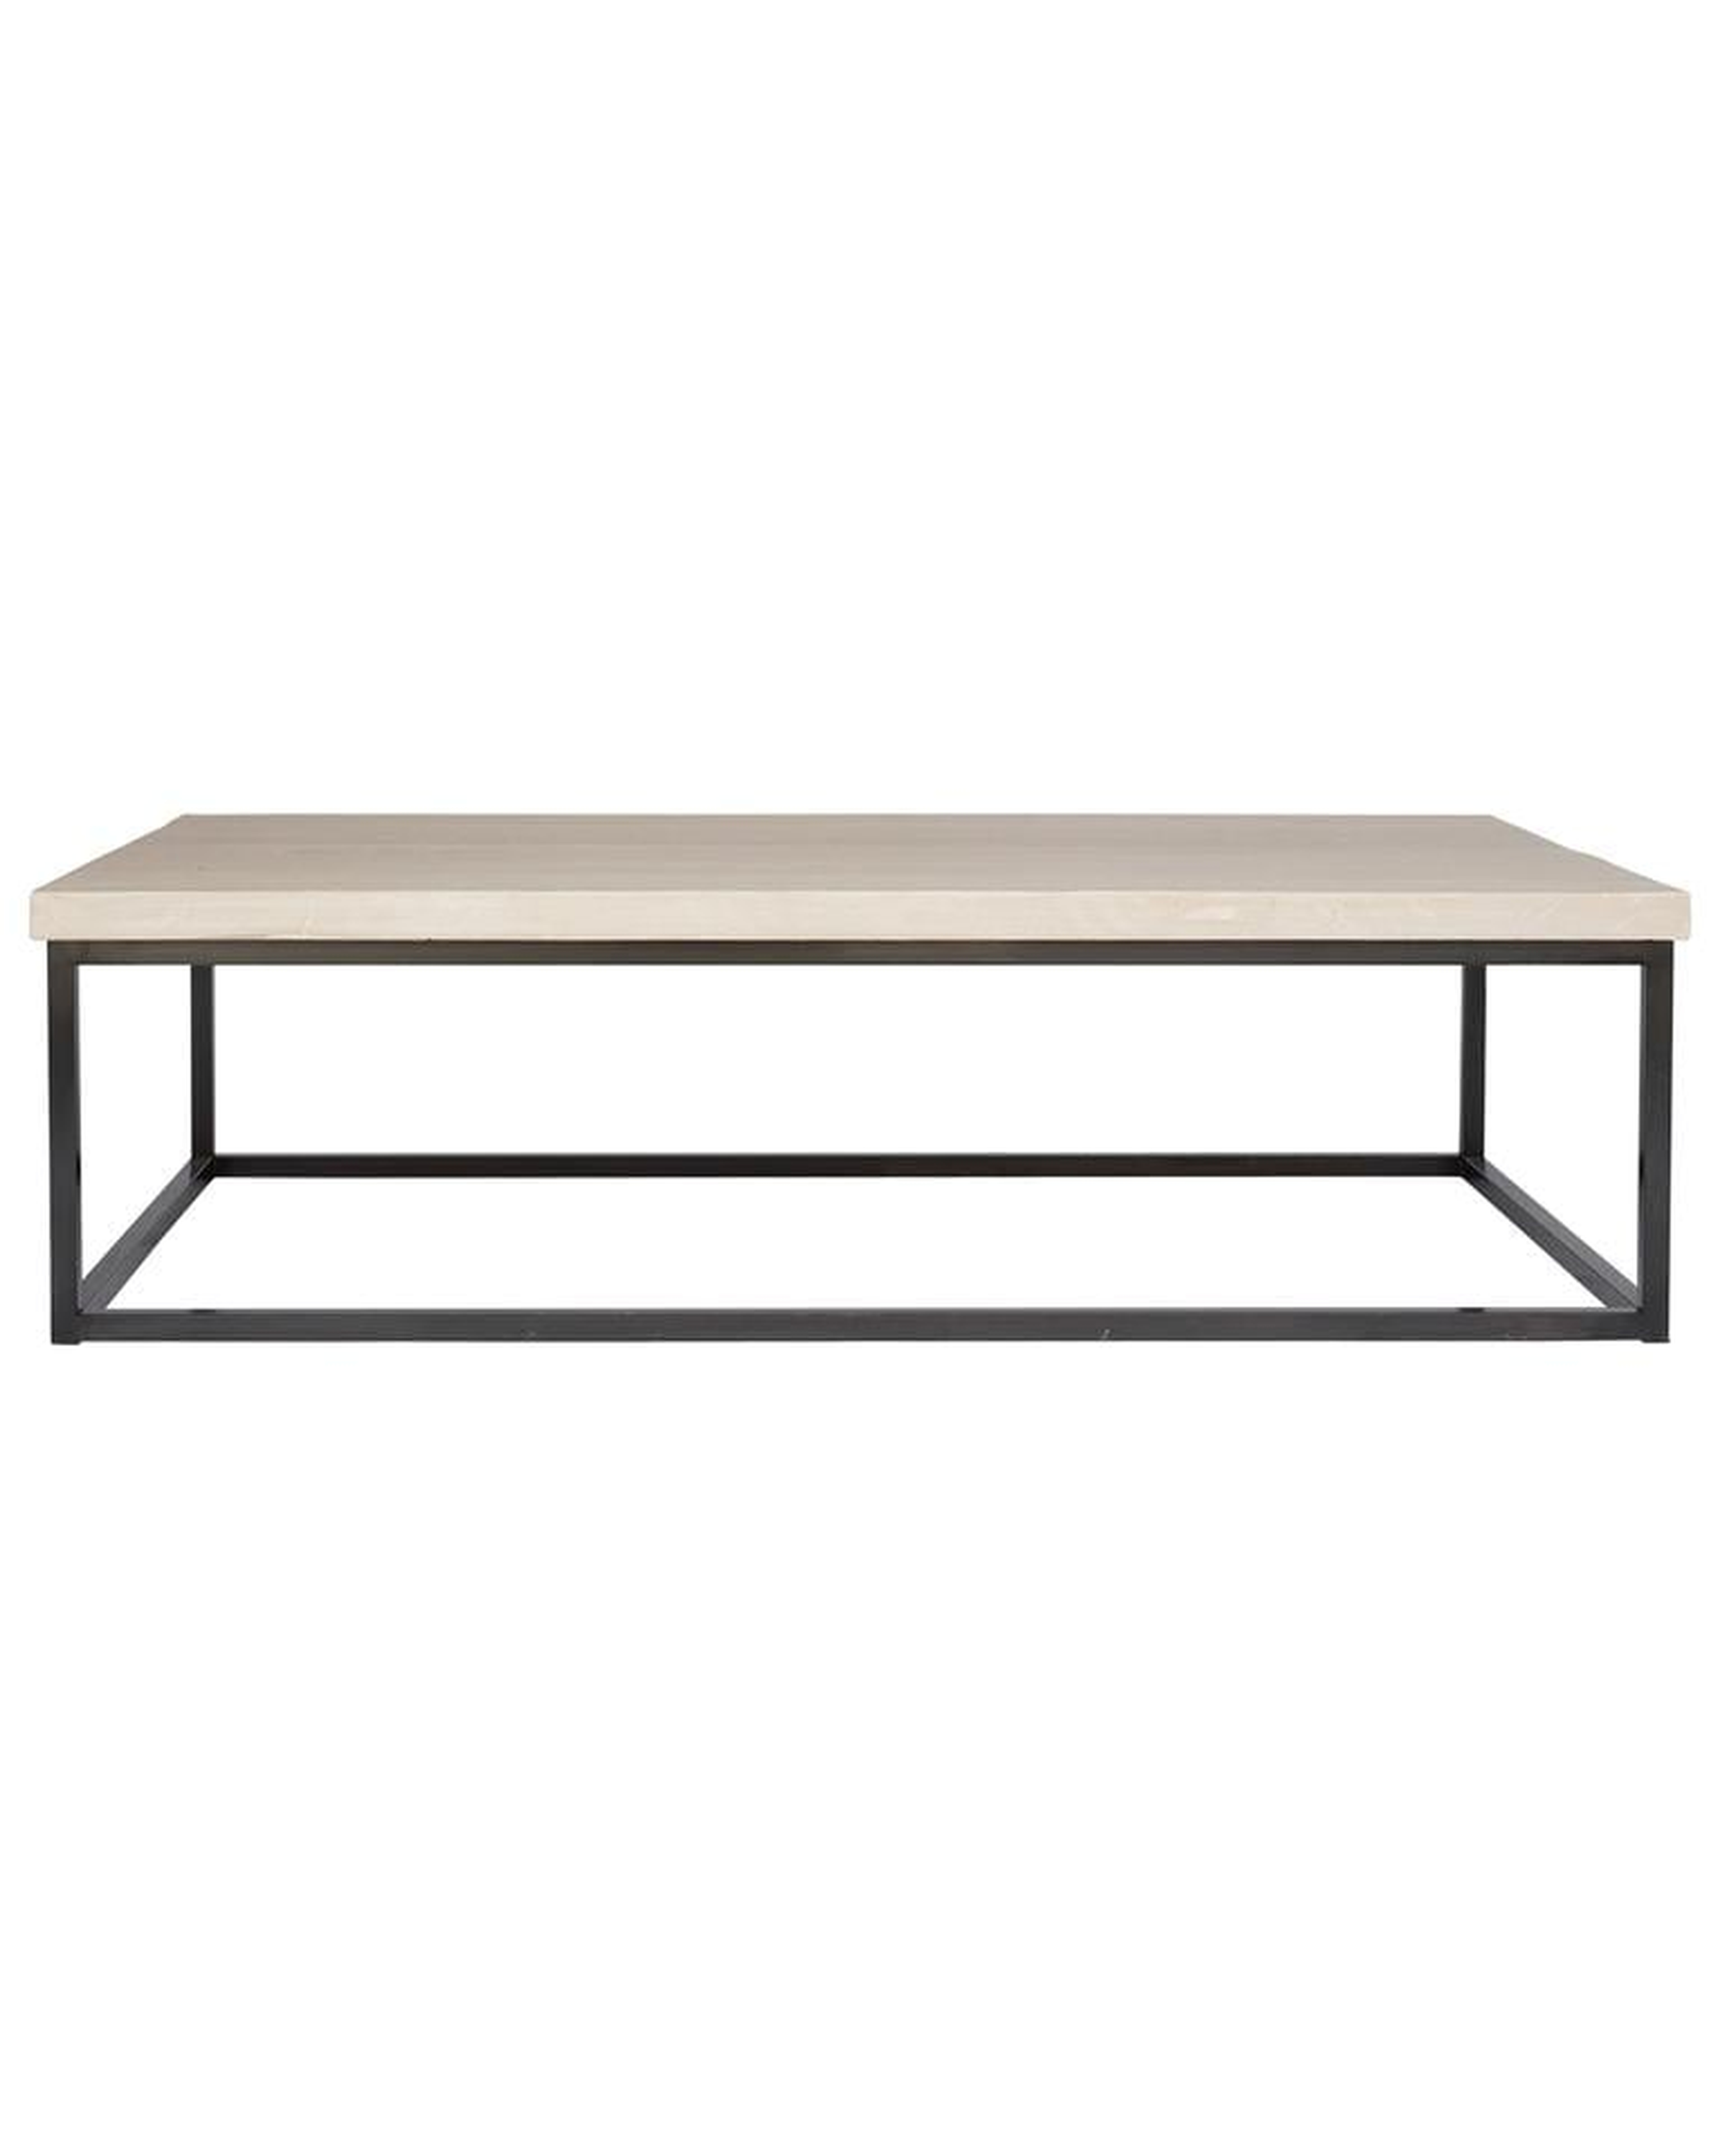 LEWIS COFFEE TABLE, SMALL - McGee & Co.